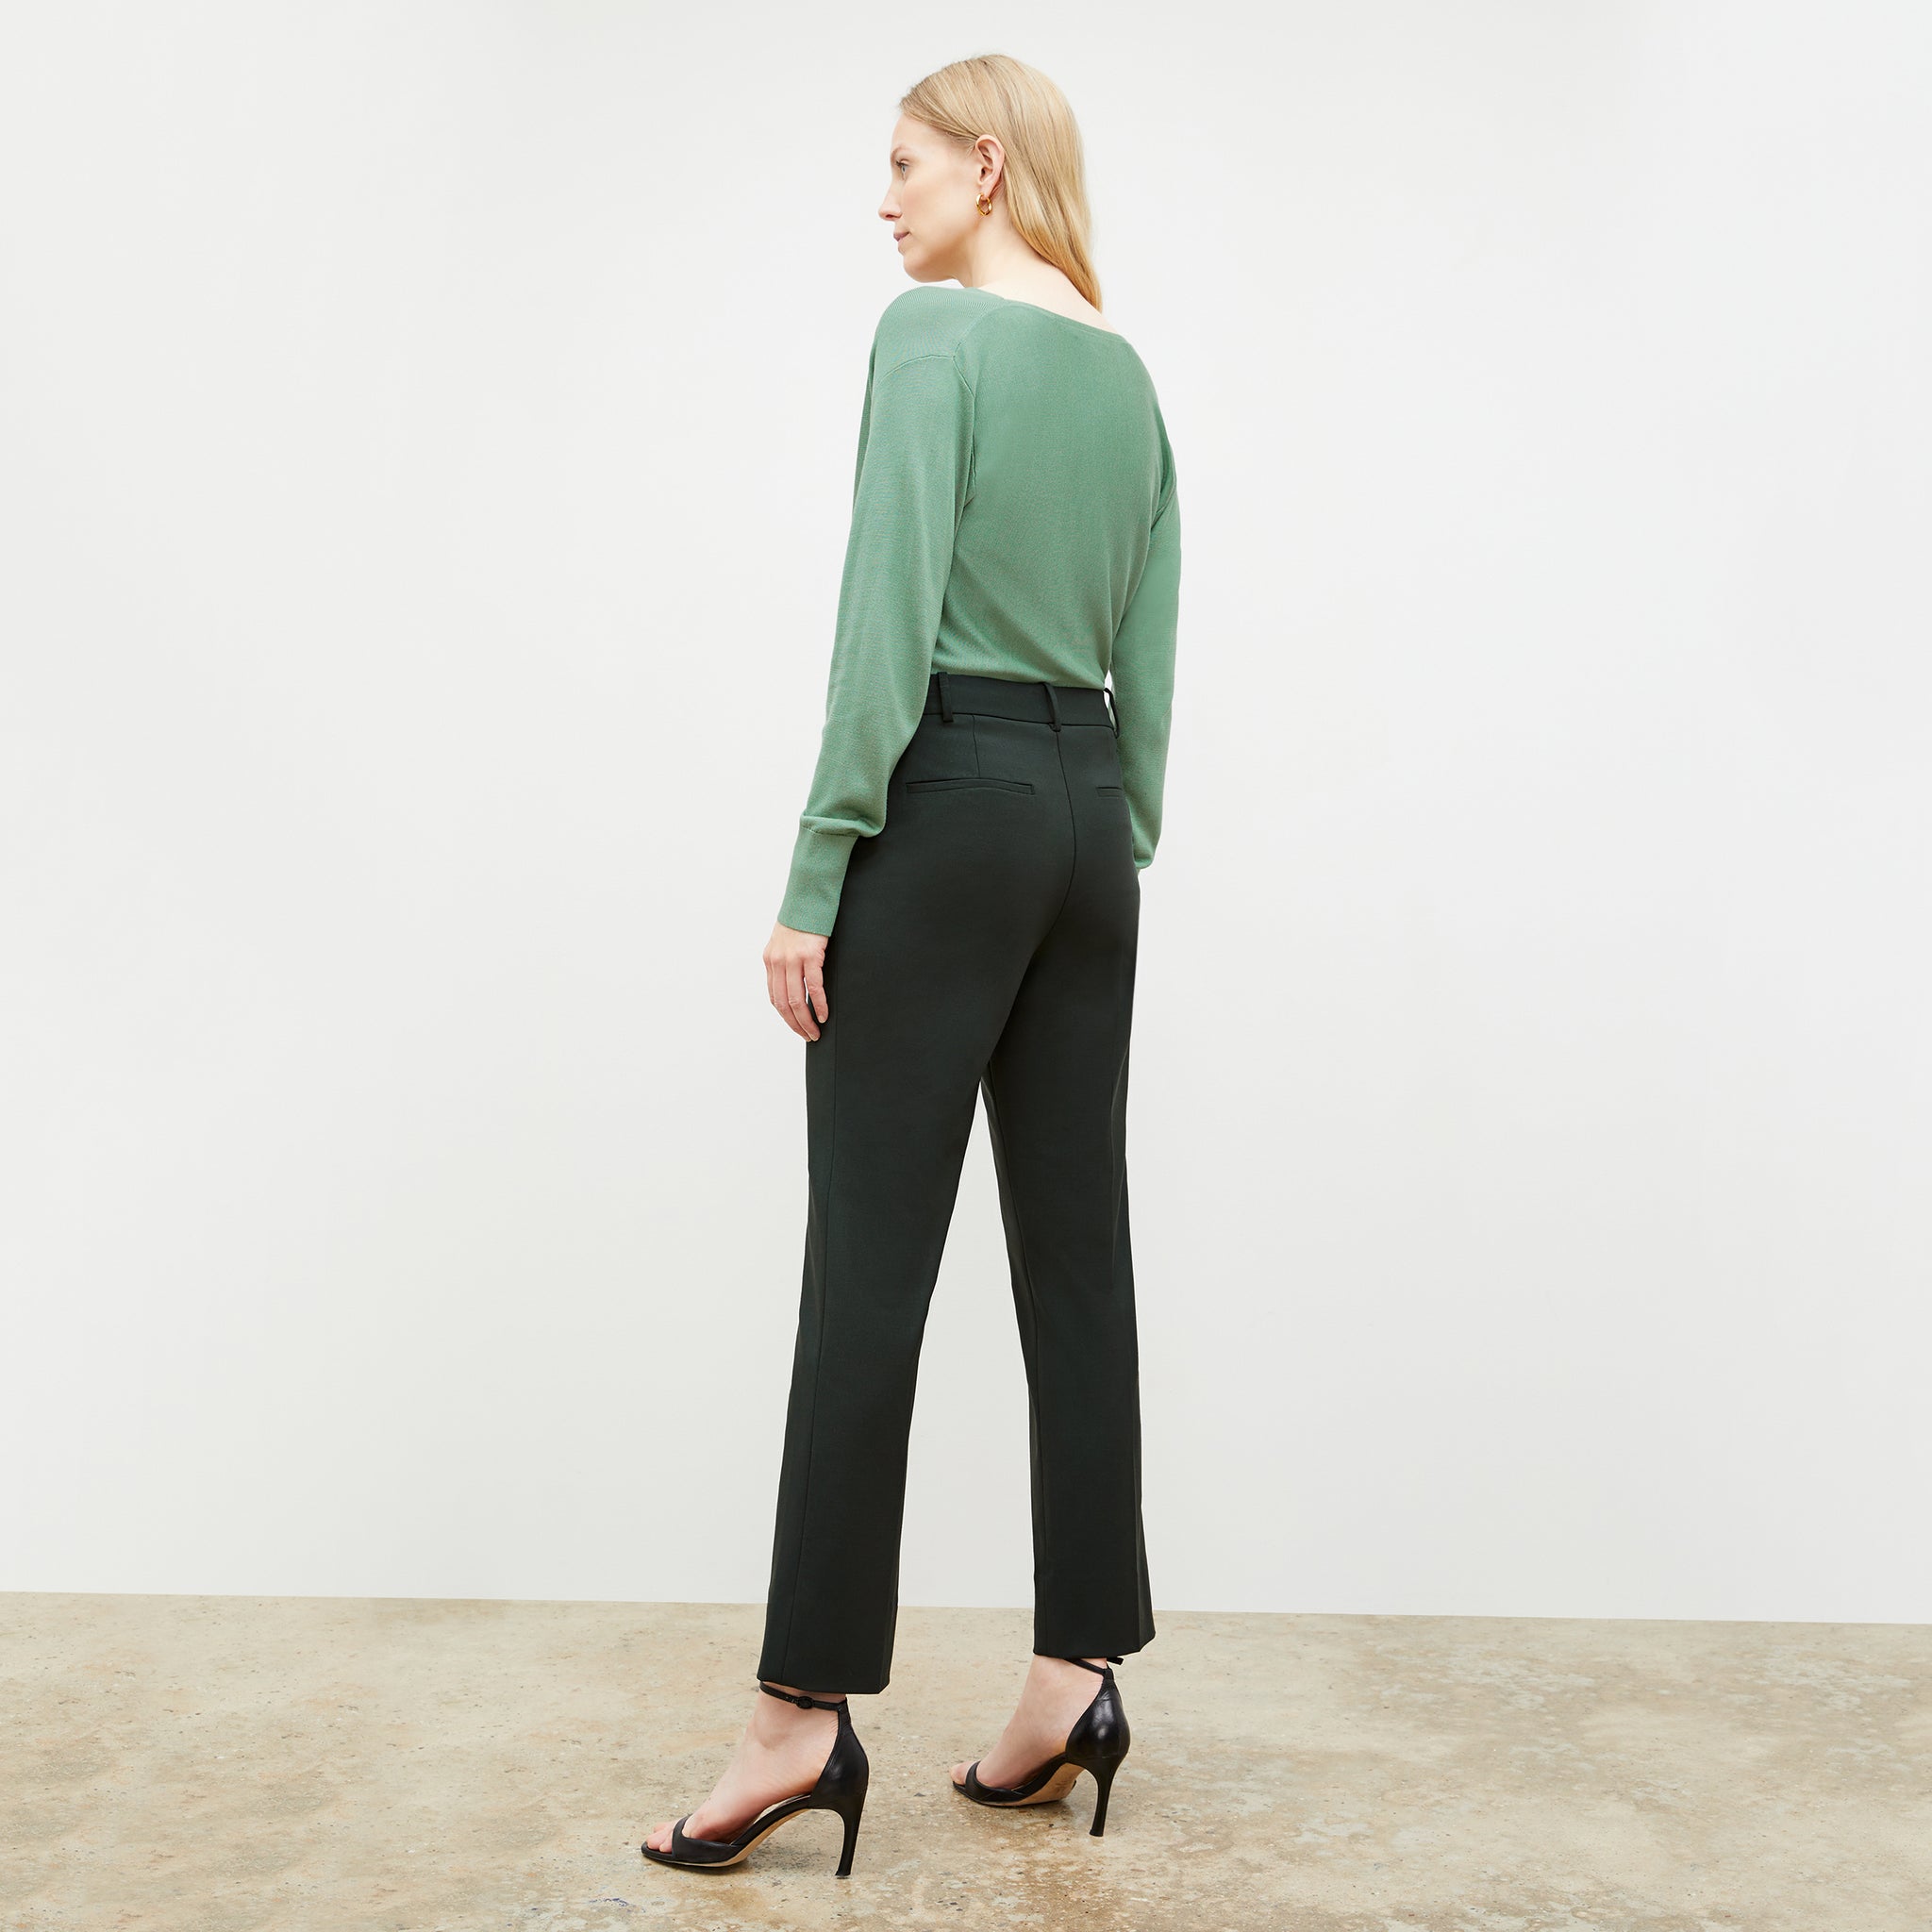 Back image of a woman wearing the monica top in spring green